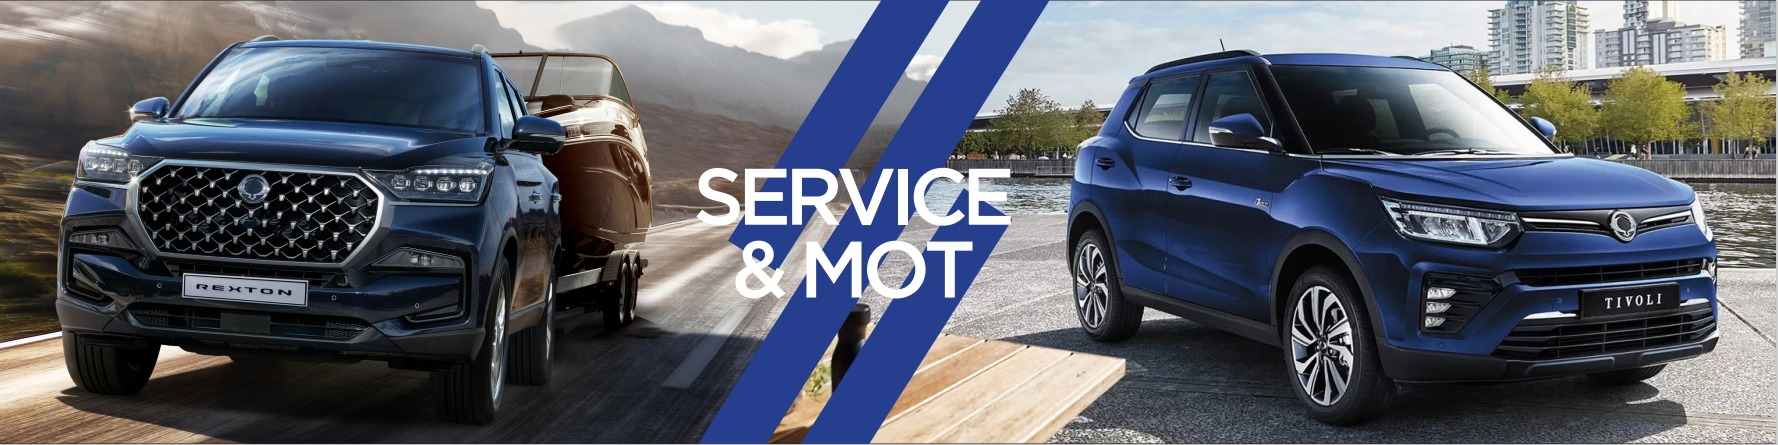 Book an MOT or Service at AutoVillage SsangYong